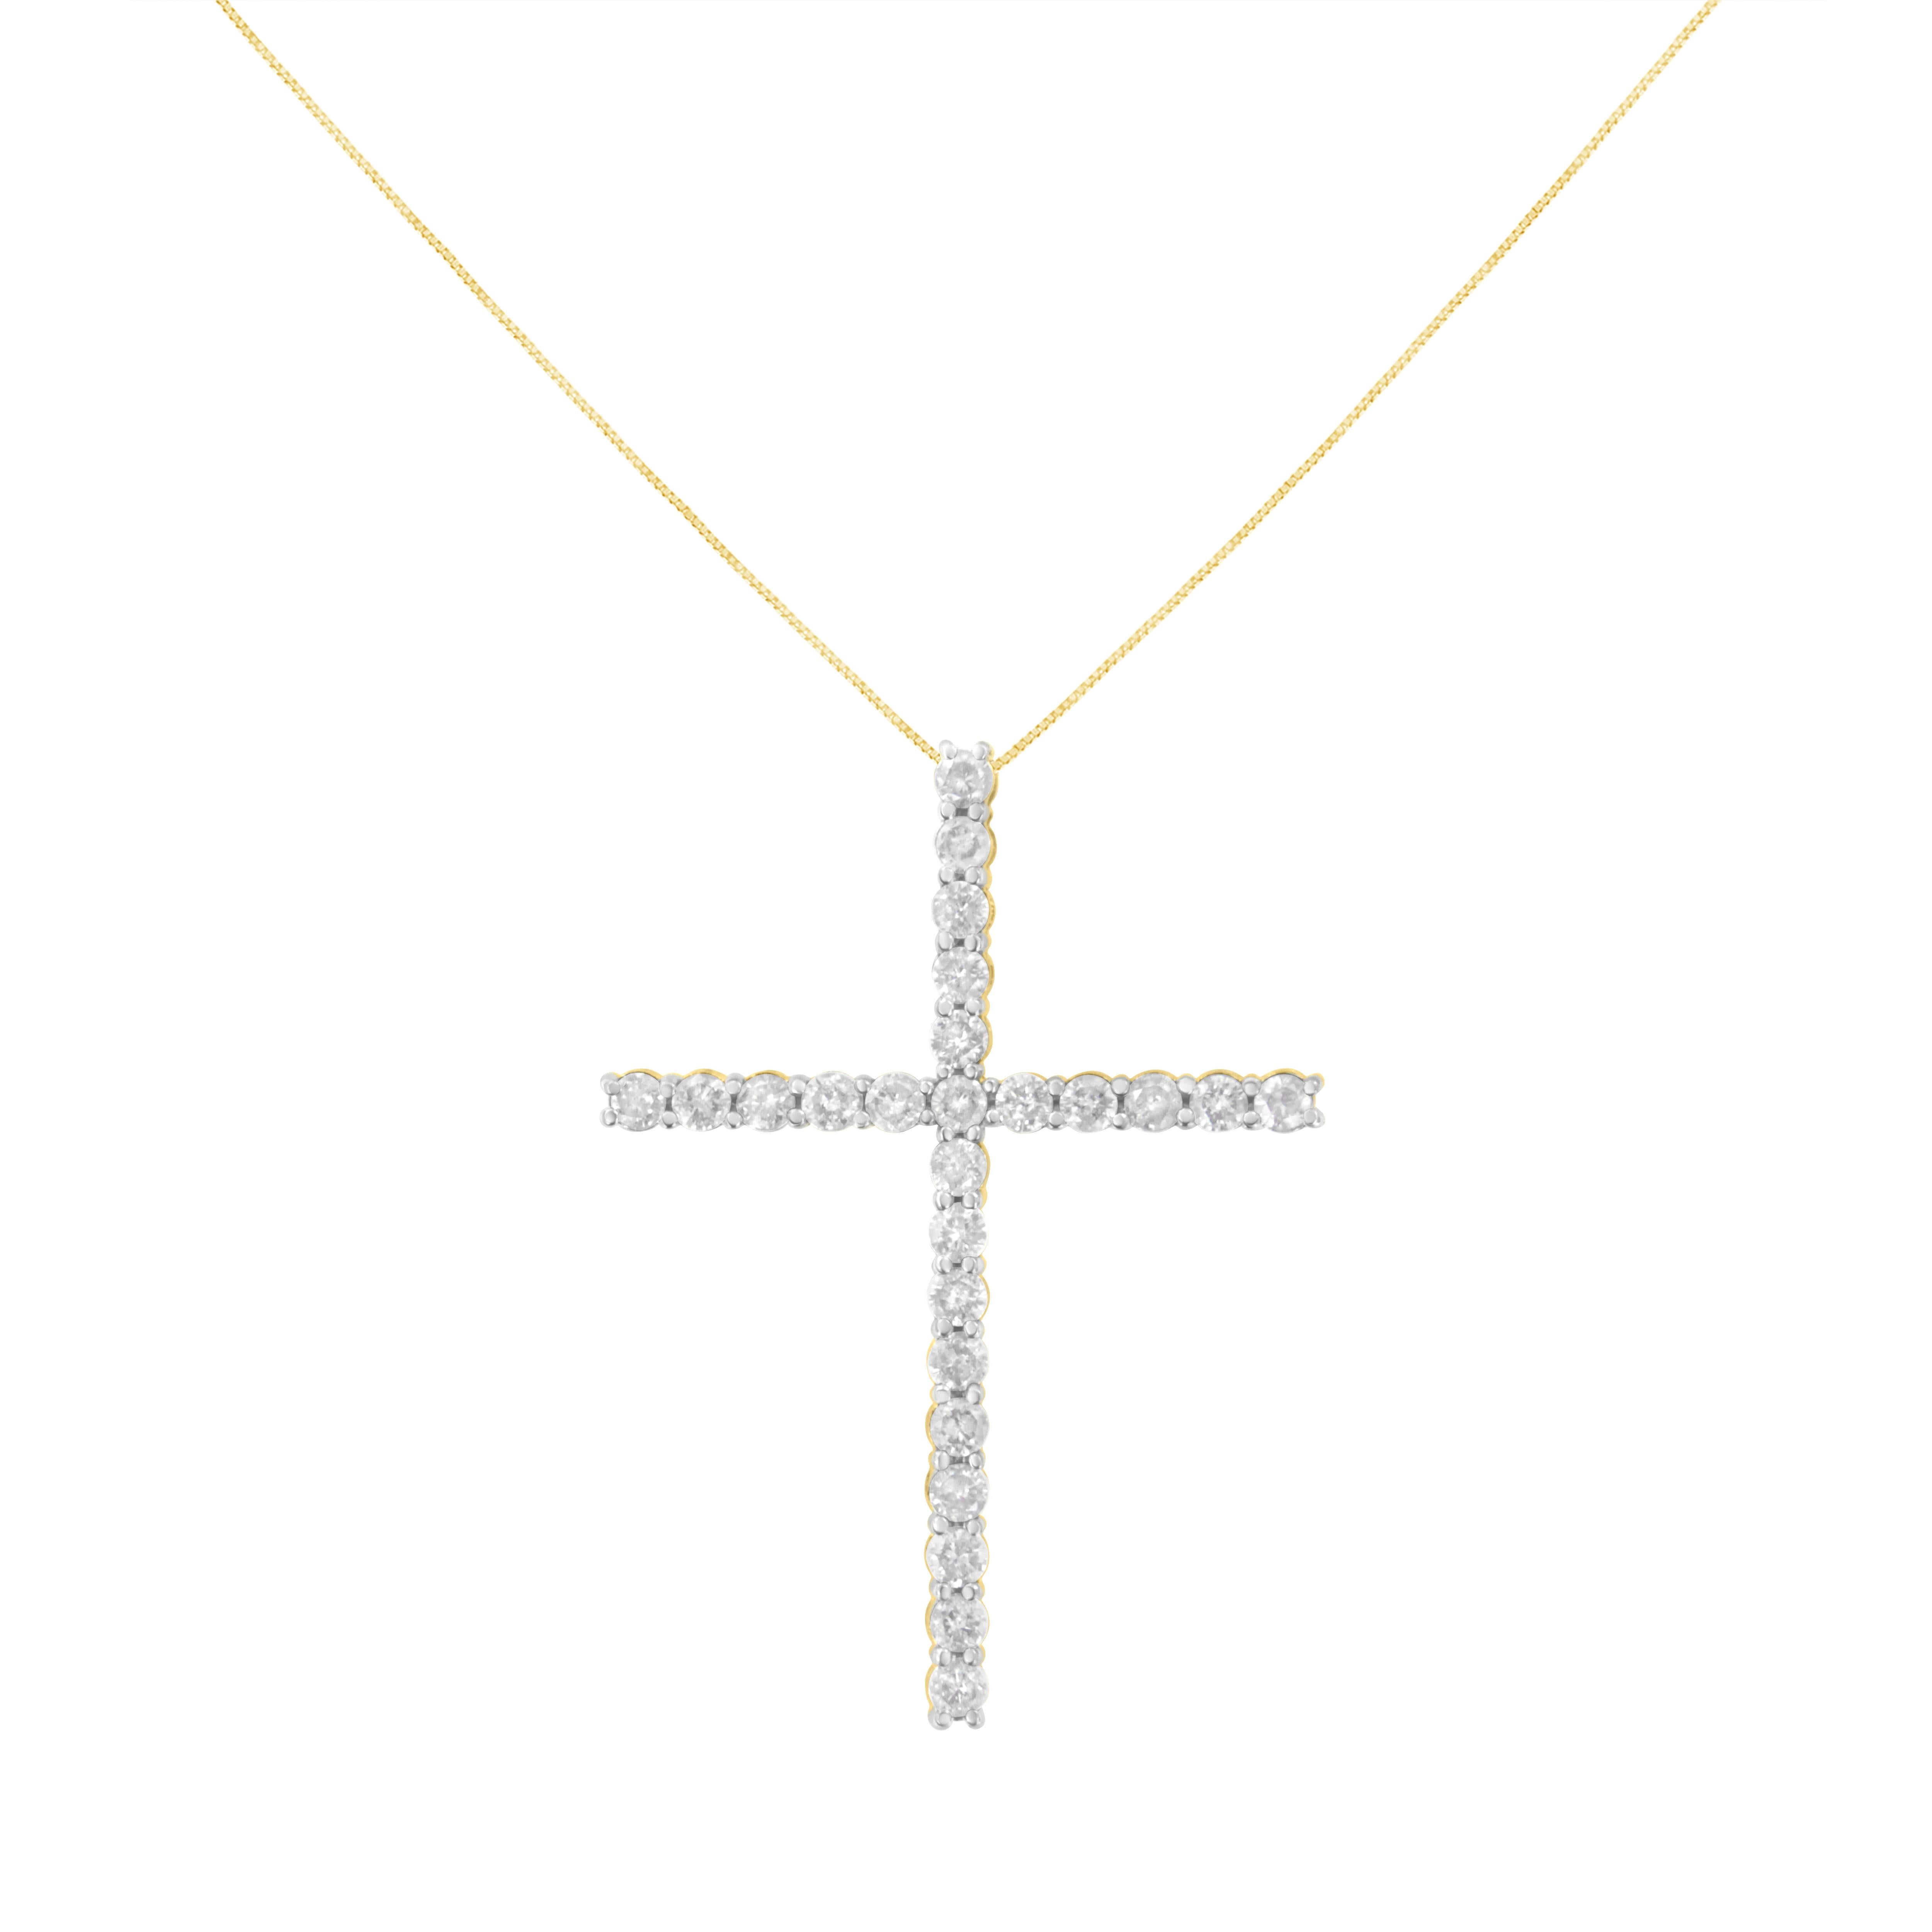 Share your faith with this stunning diamond cross pendant necklace. This cherished cross necklace for her, features 25 natural, round diamonds set in 2 Micron 10k Yellow Gold Plated Sterling Silver. The pendant is suspended from an 18-inch box chain